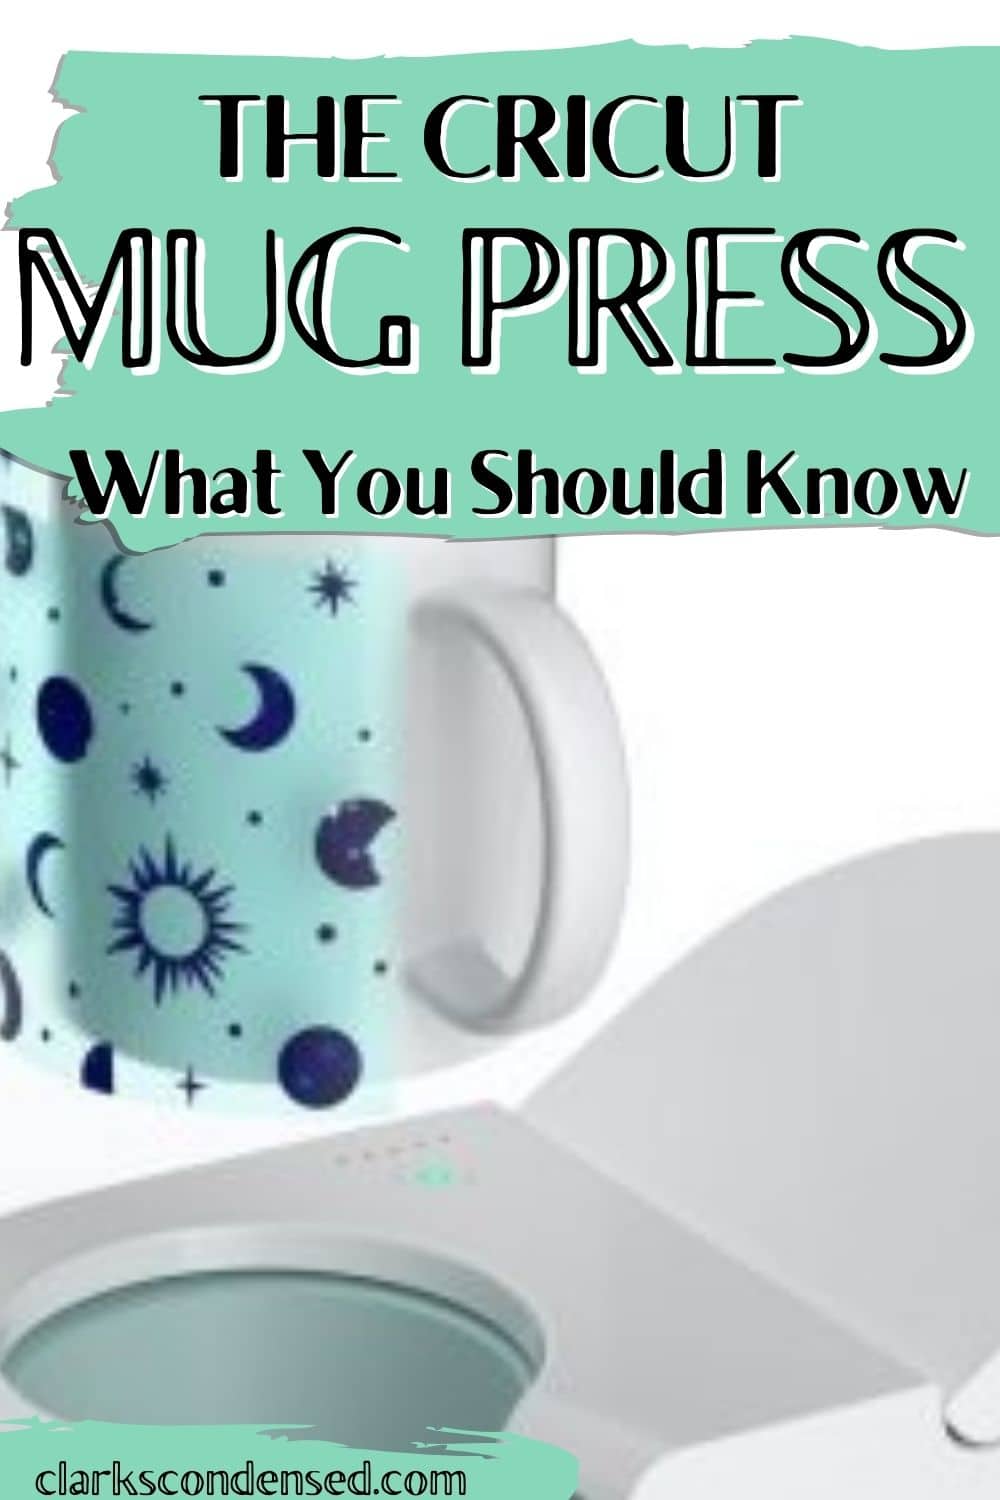 How to Use Infusible Ink Markers to Make a Cricut Mug! - Leap of